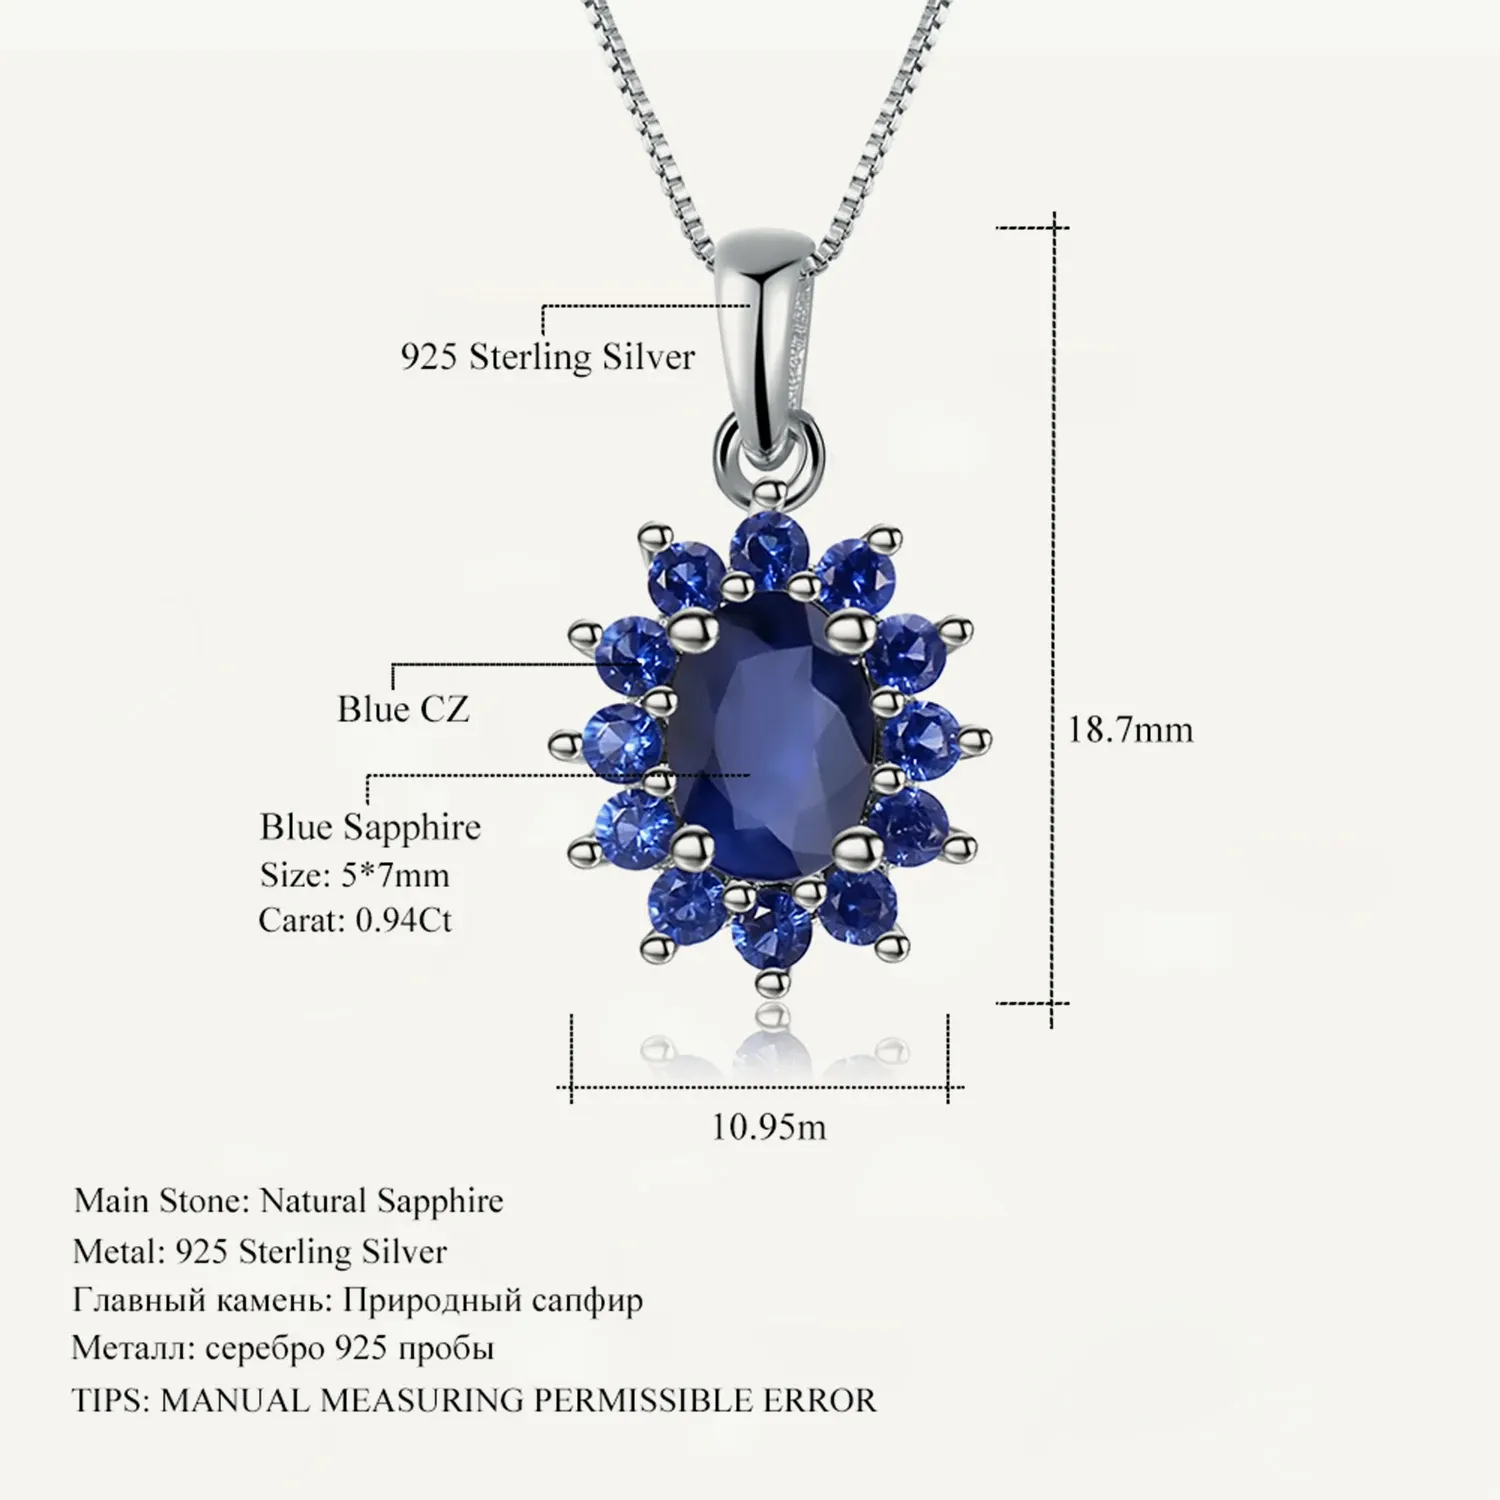 Necklaces Gem's Ballet 0.94Ct Natural Blue Sapphire Genuine 925 Sterling Silver Pendants Necklace For Women Anniversary Gift Fine Jewelry